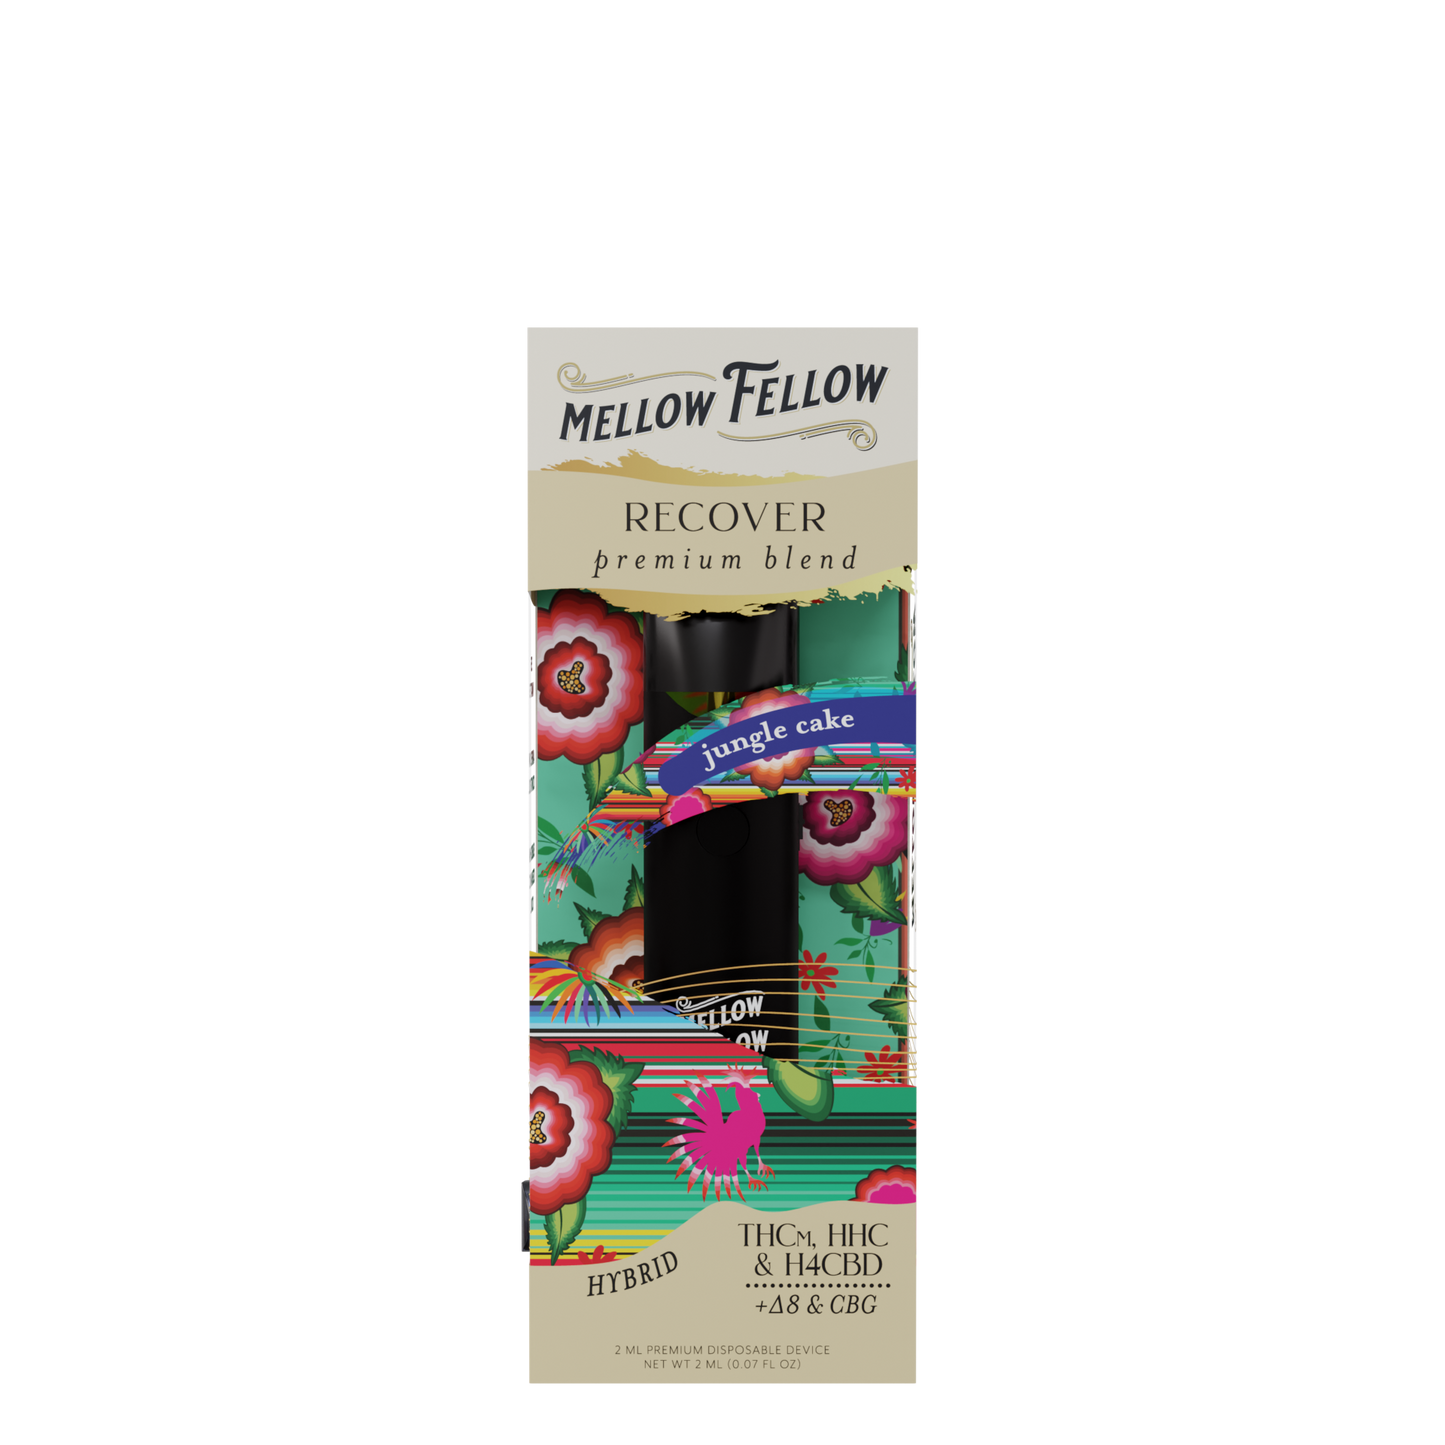 Mellow Fellow Clarity (Grease Monkey) & Recover (Jungle Cake) 2ml Disposable Vape - Day/Night Bundle Best Sales Price - Bundles